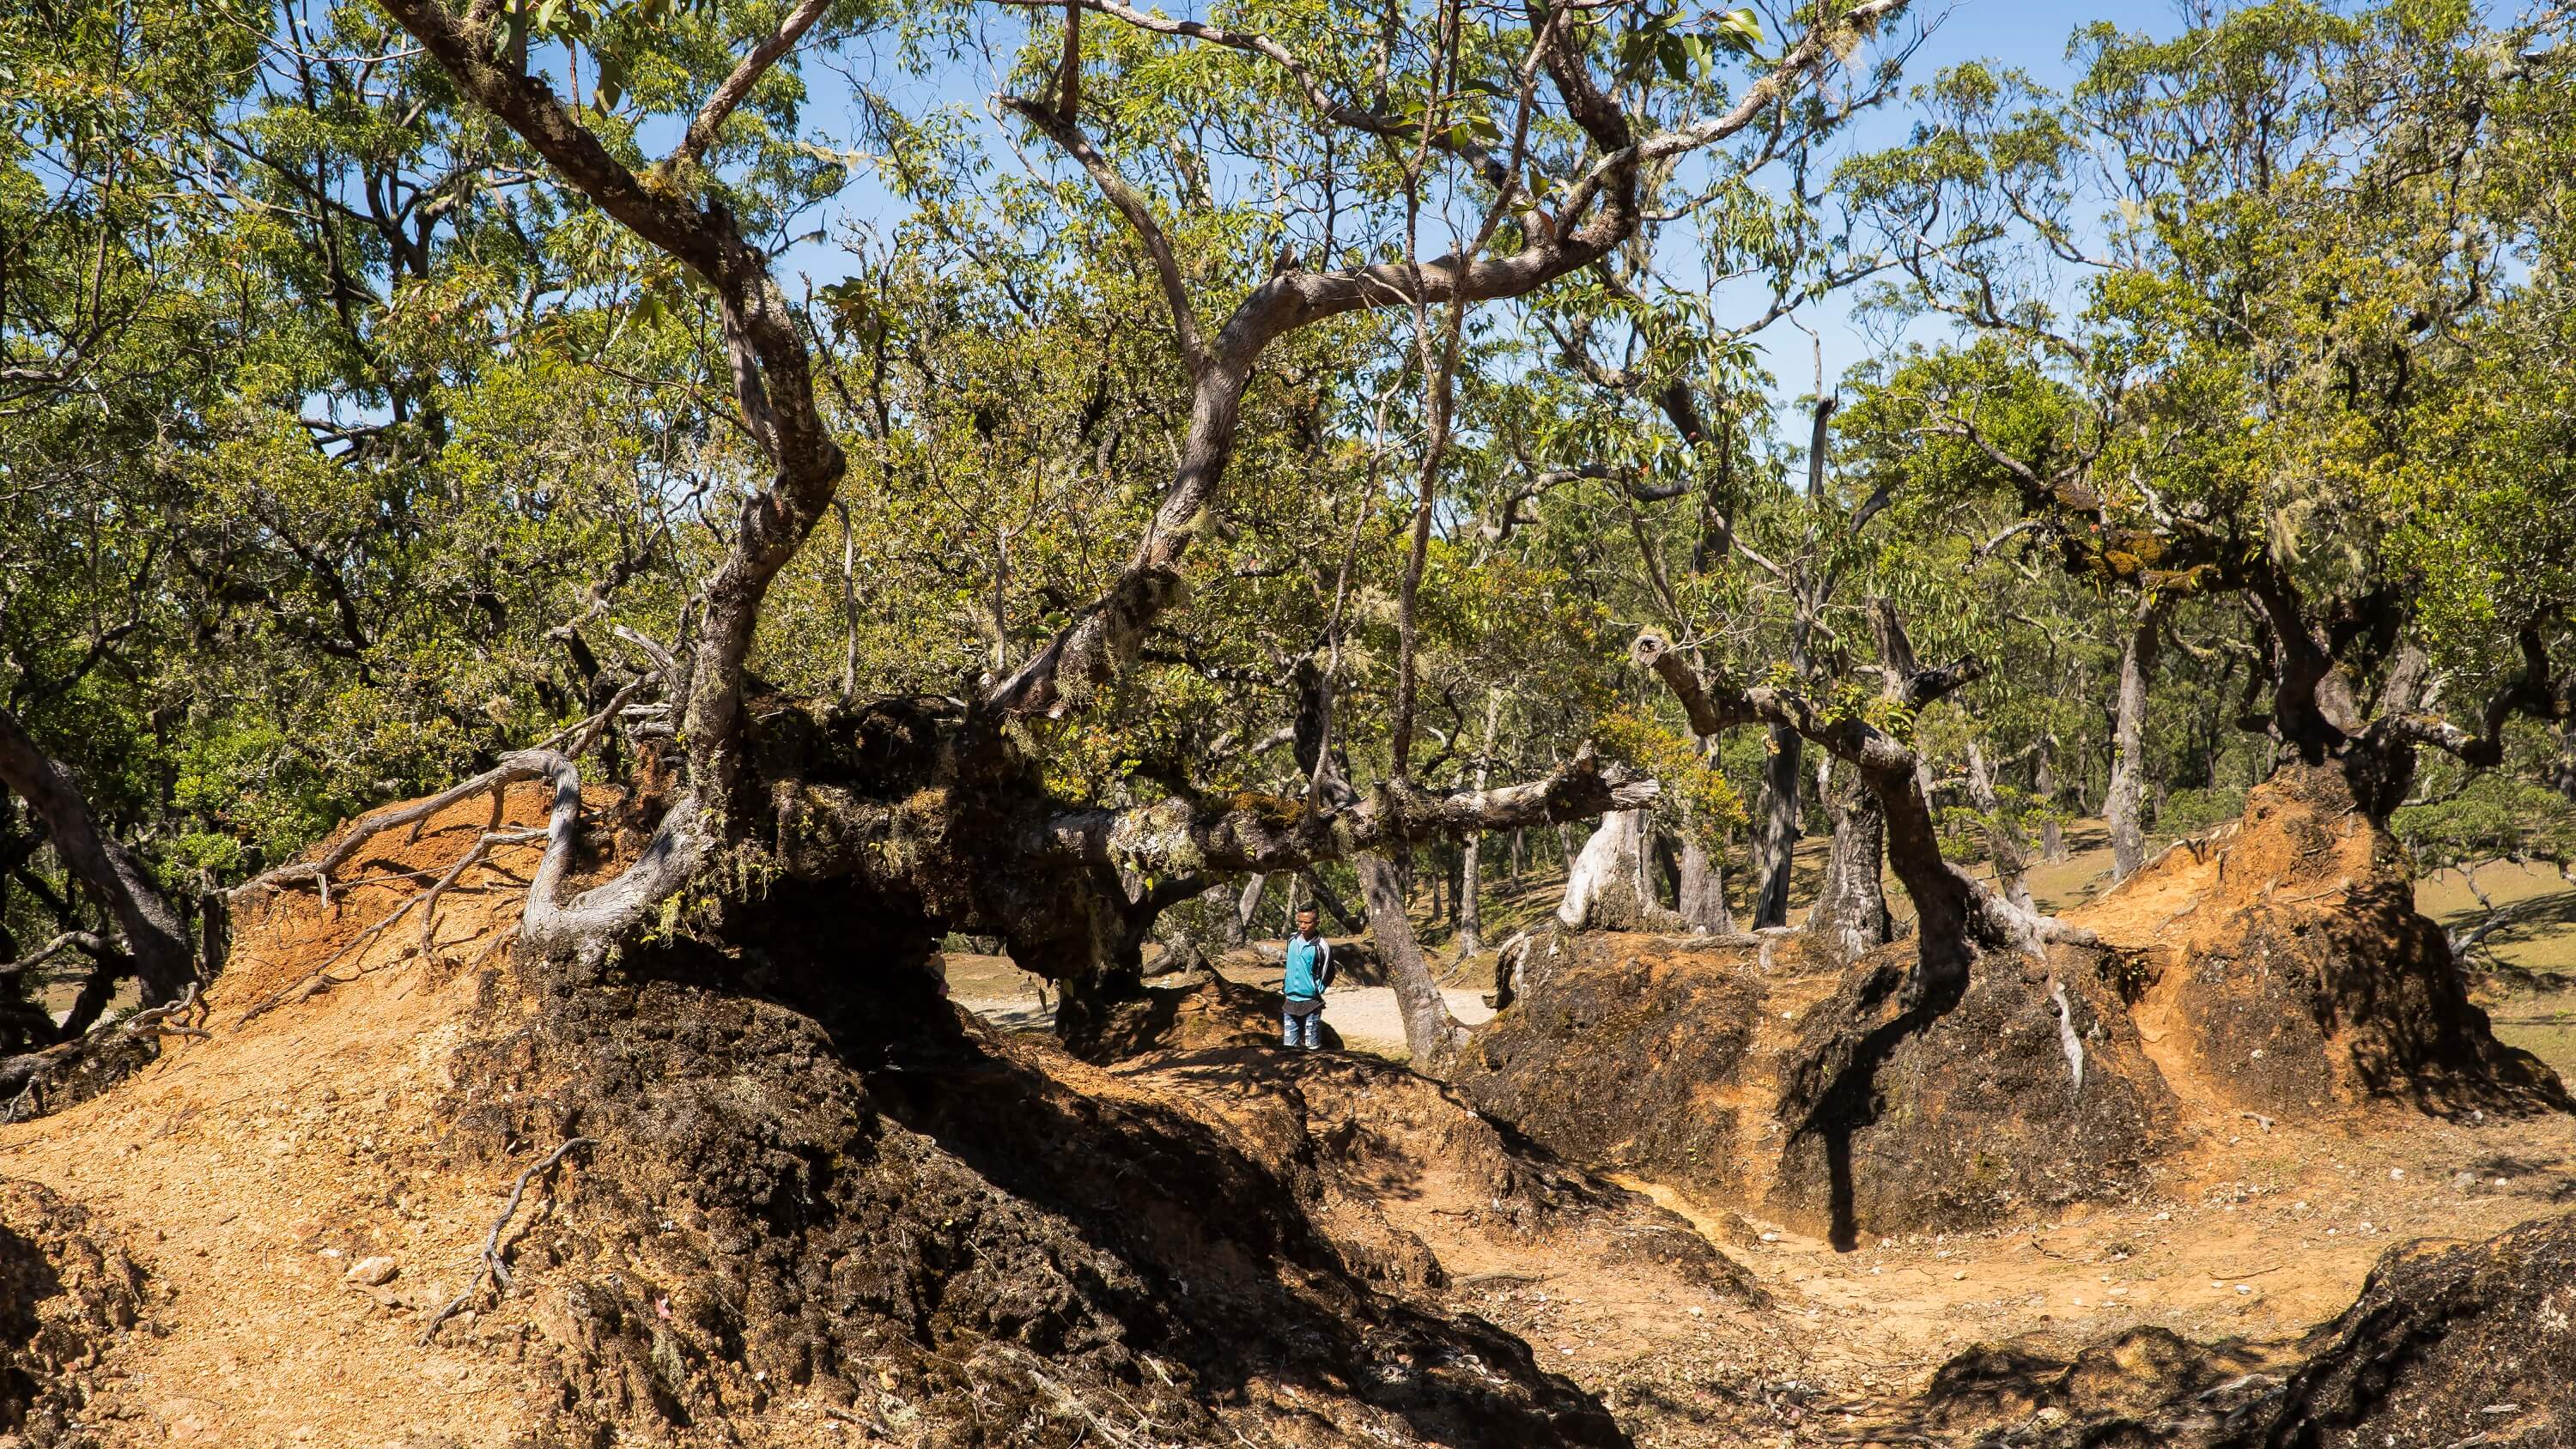 Mount Mutis’ bonsai forest is a sacred site for harvesting honey and praying to the ancestors in Timorese indigenous religion. Photo by Andra Fembriarto